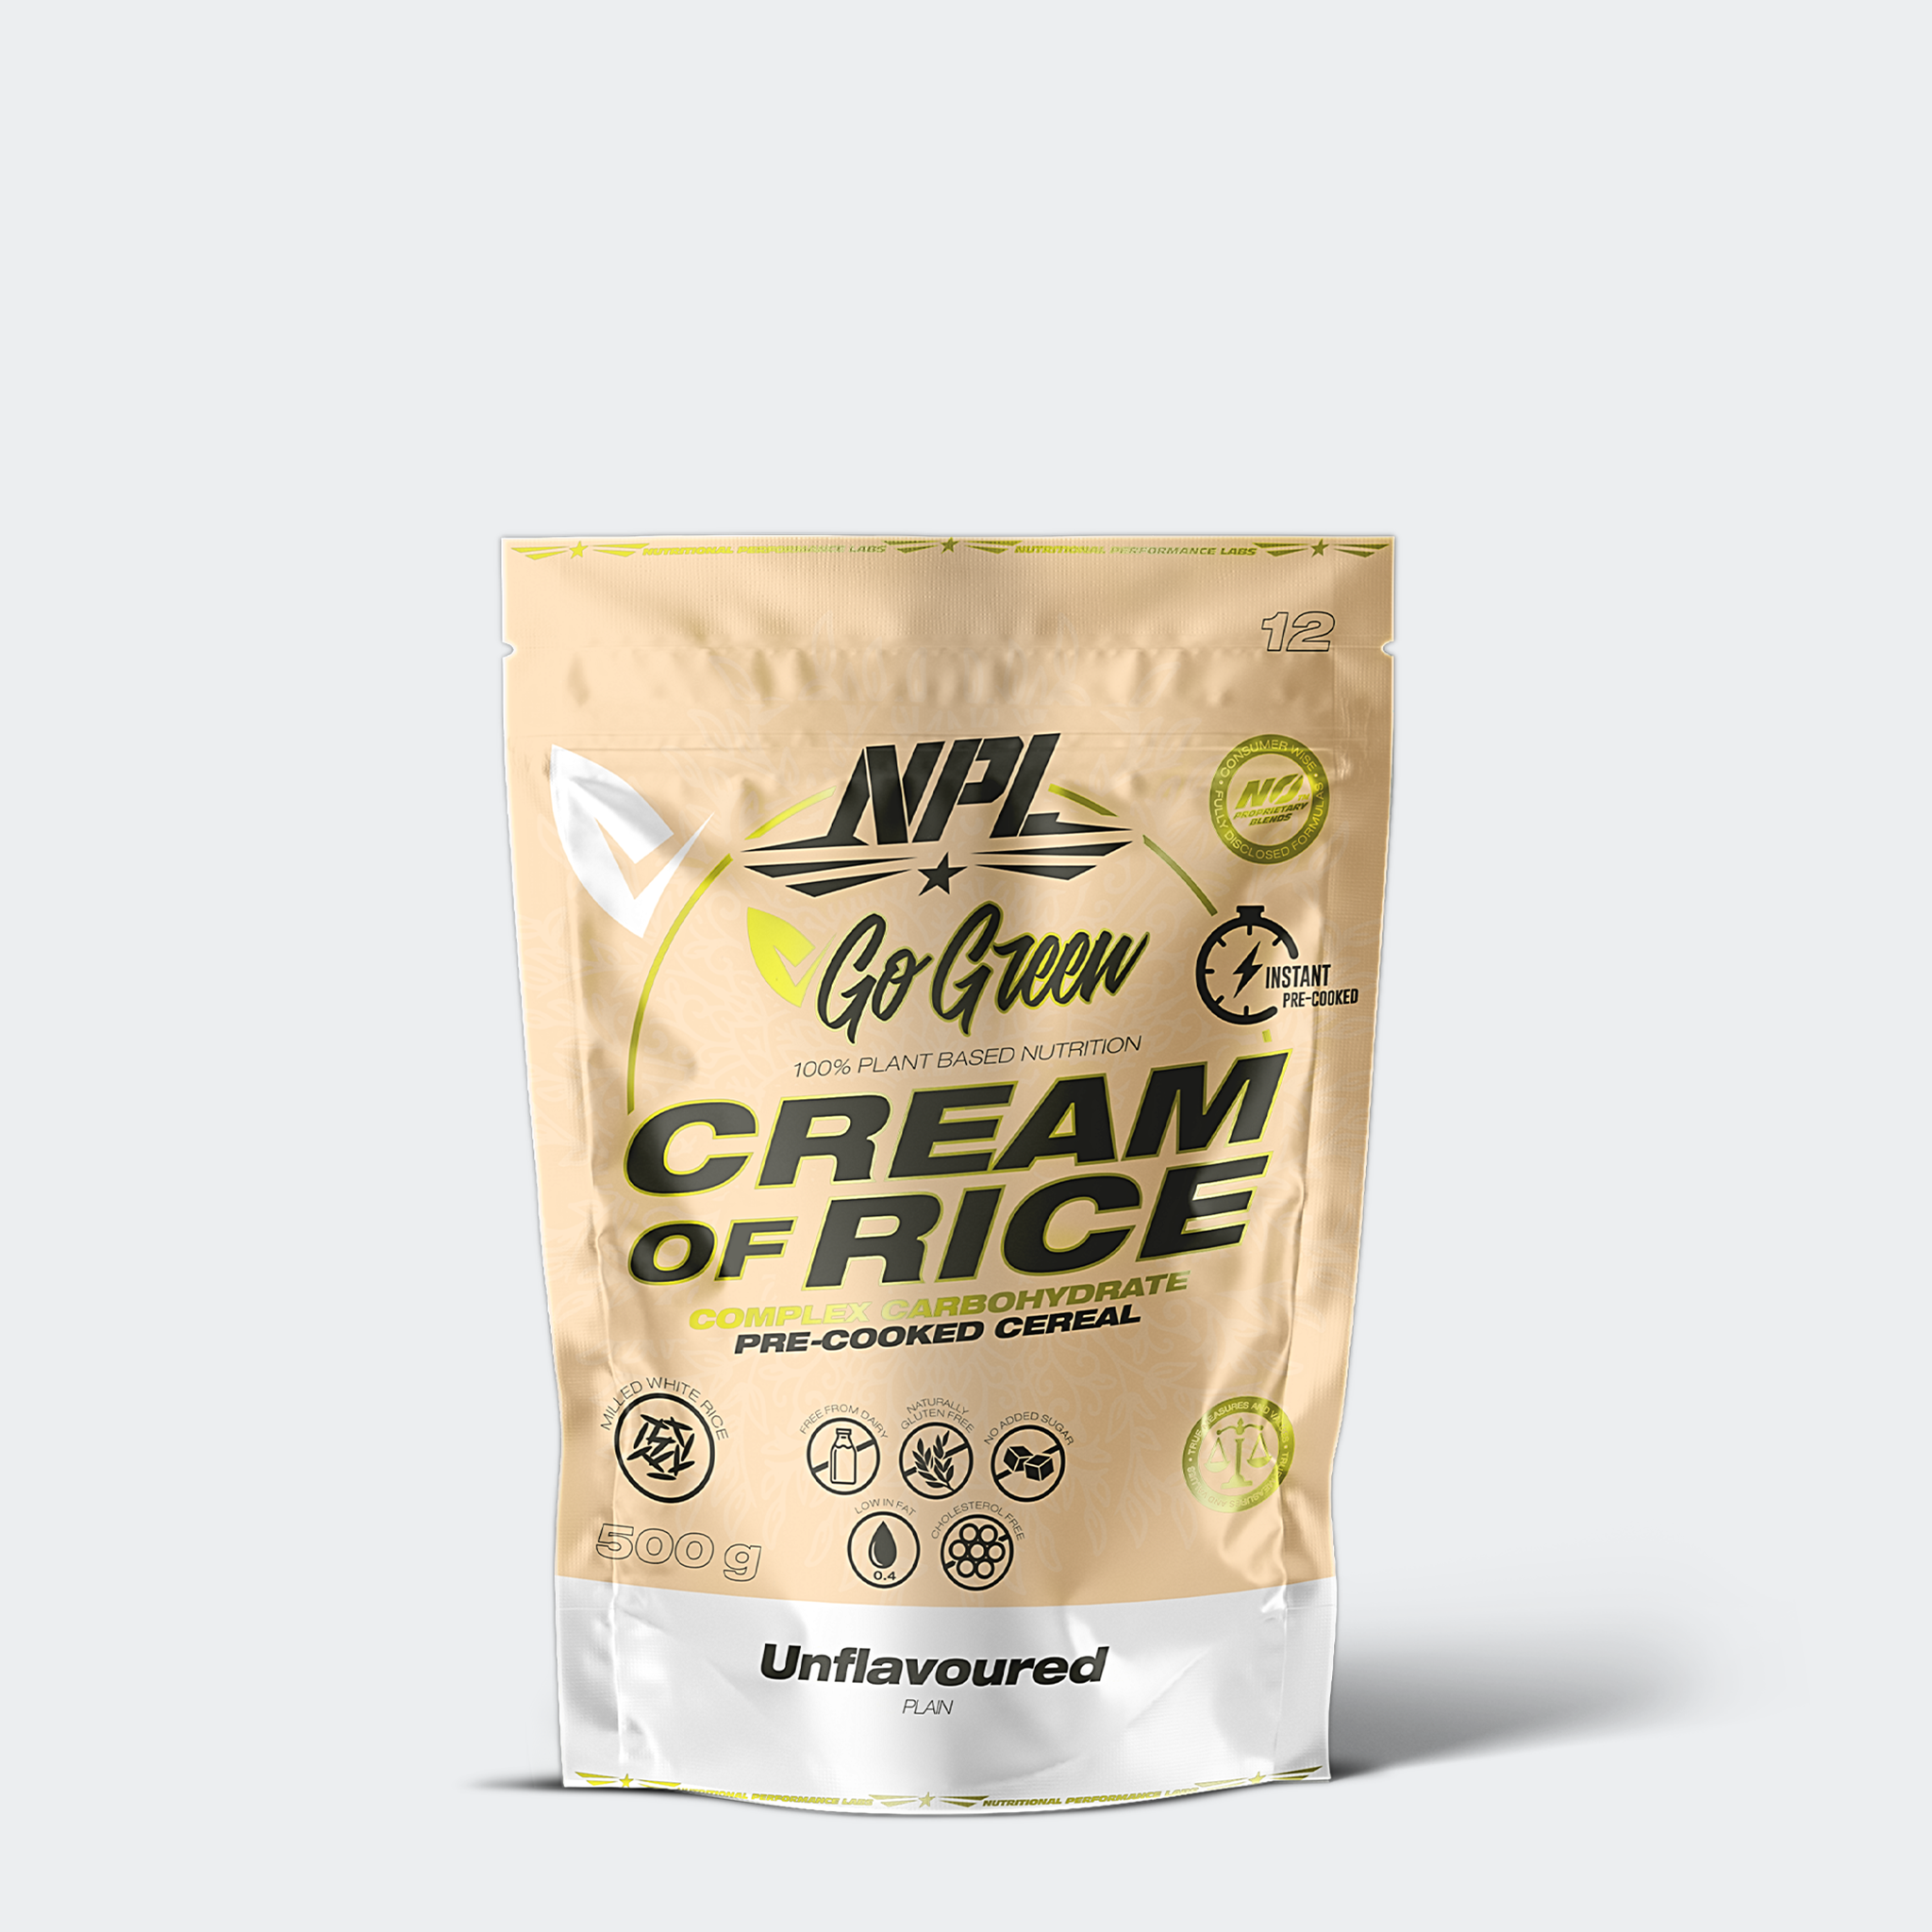 Cream of Rice is a versatile and delicious hot cereal that is perfect for breakfast, lunch, or dinner. Made from high-quality ground rice, it is gluten-free, non-GMO, and easy to digest. Unflavoured